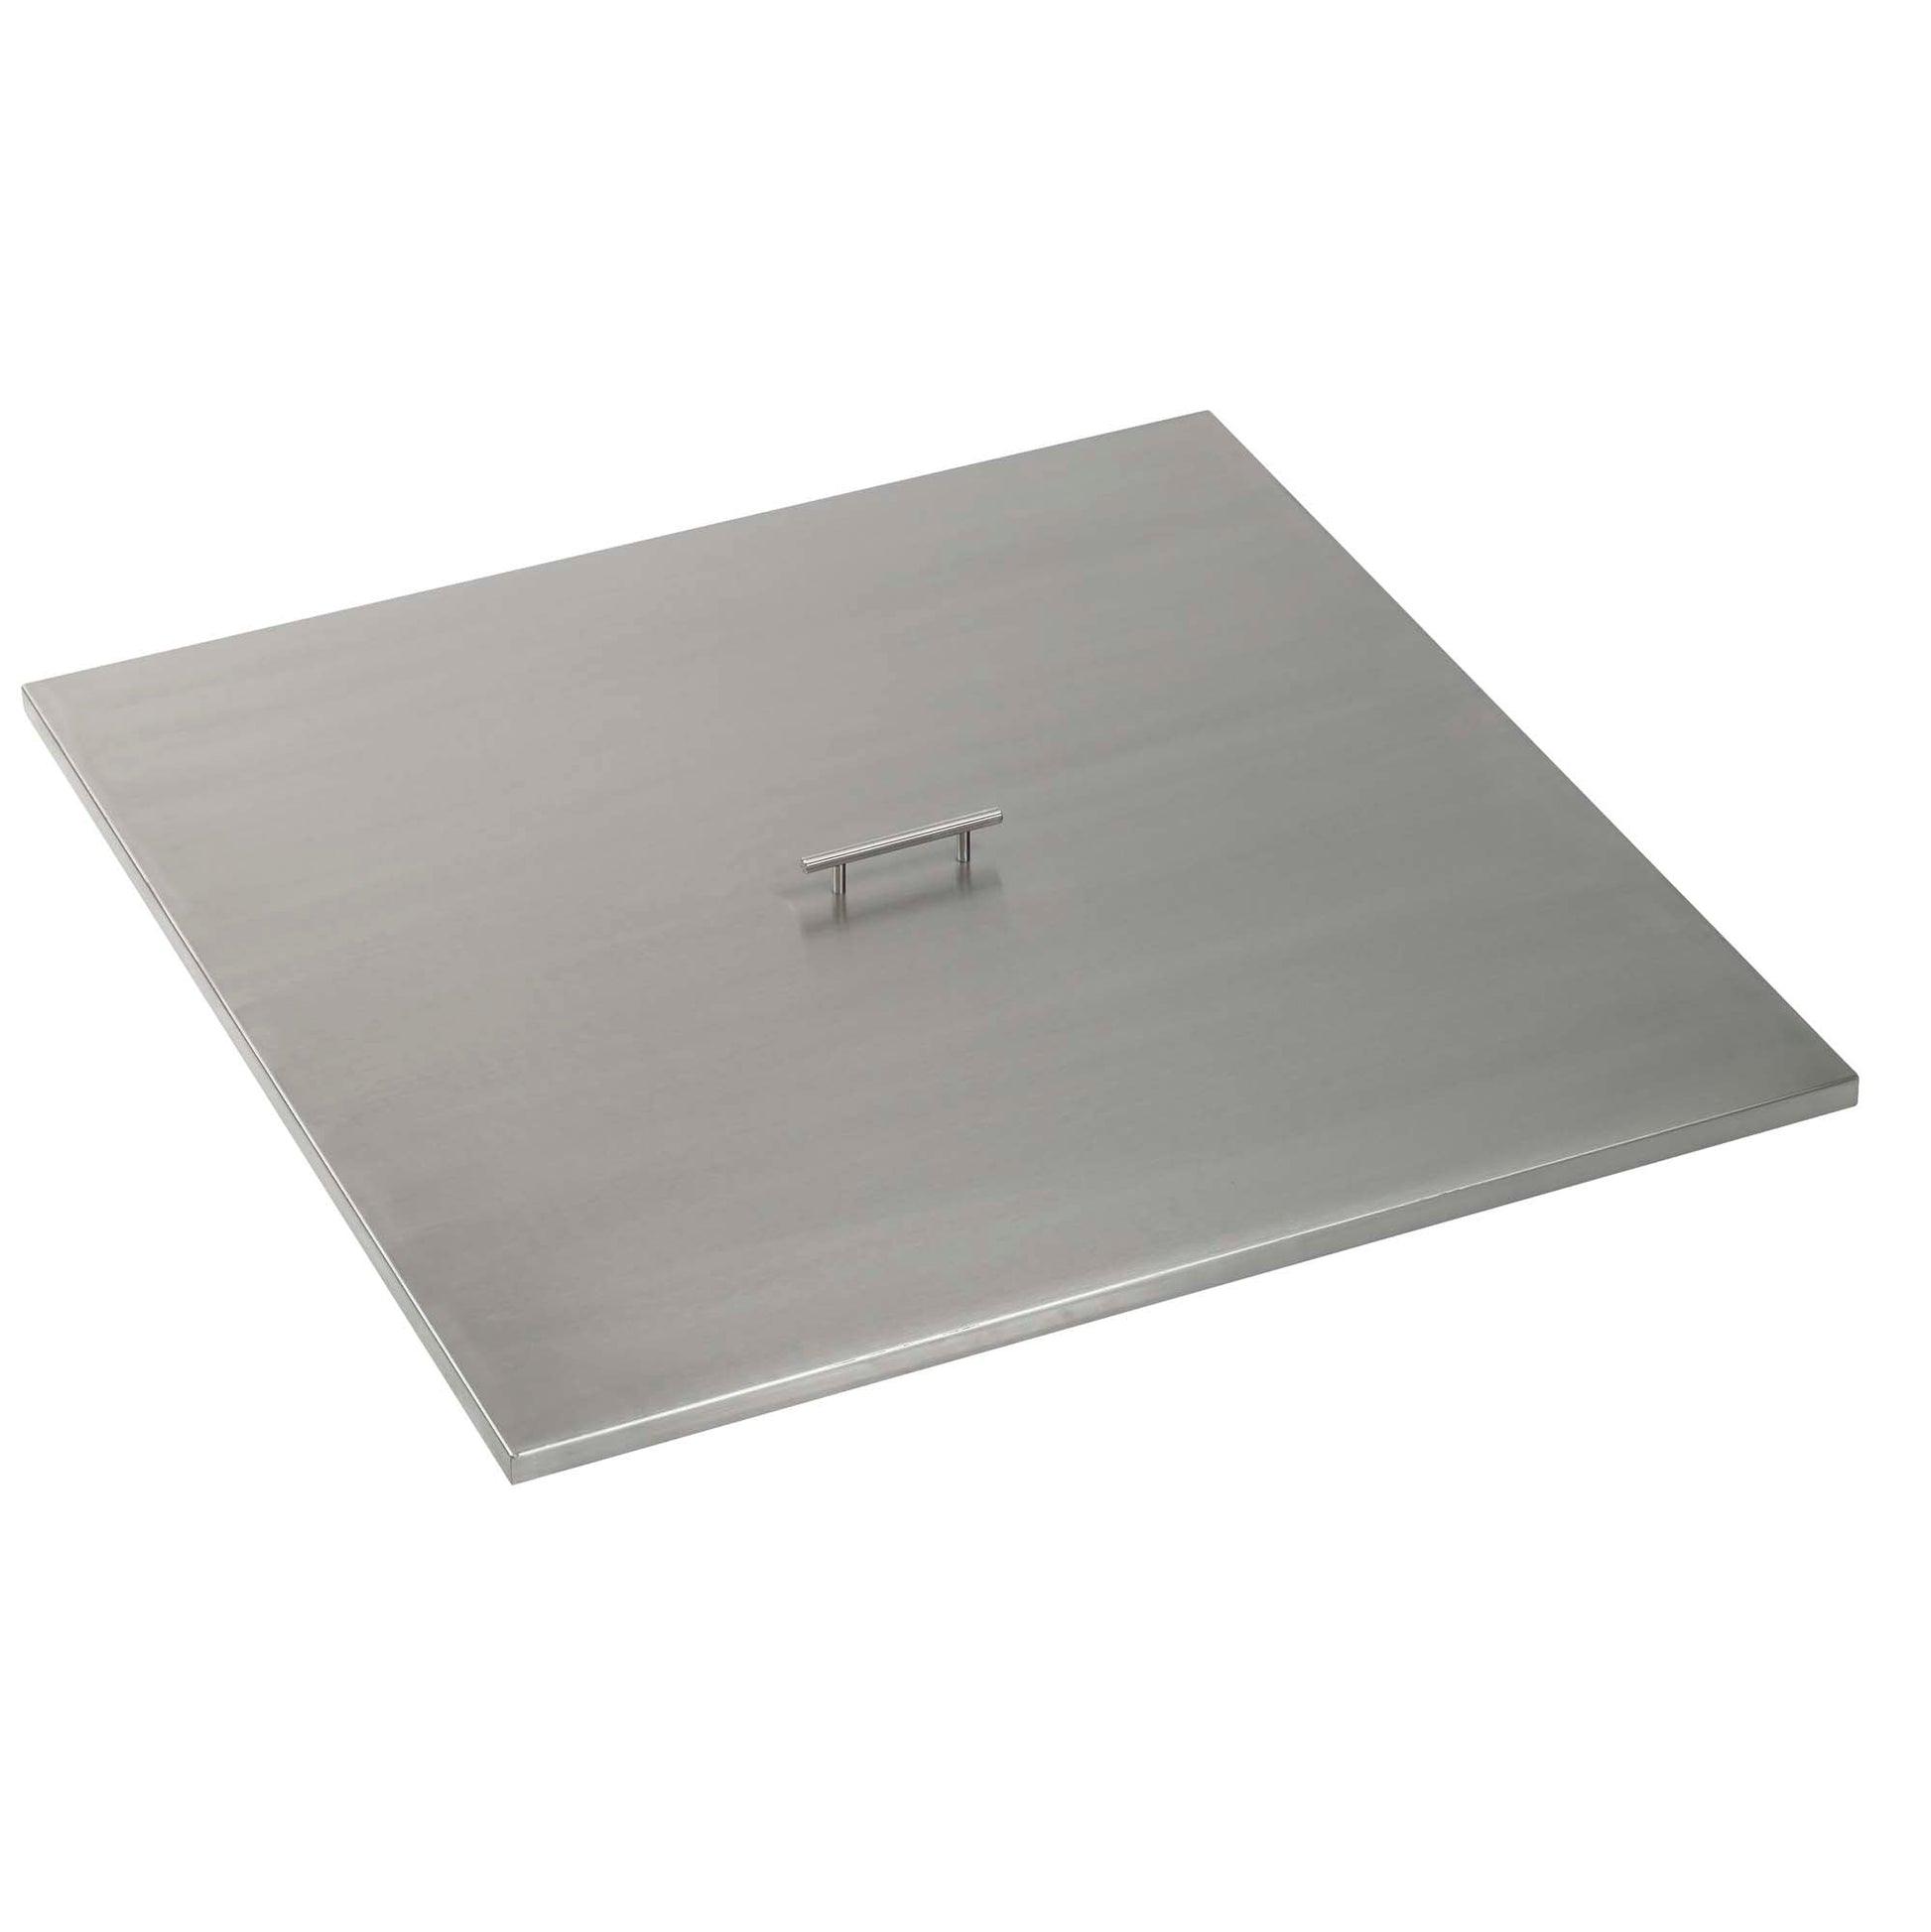 16" Stainless Steel Square Fire Pit Cover-Novel Home